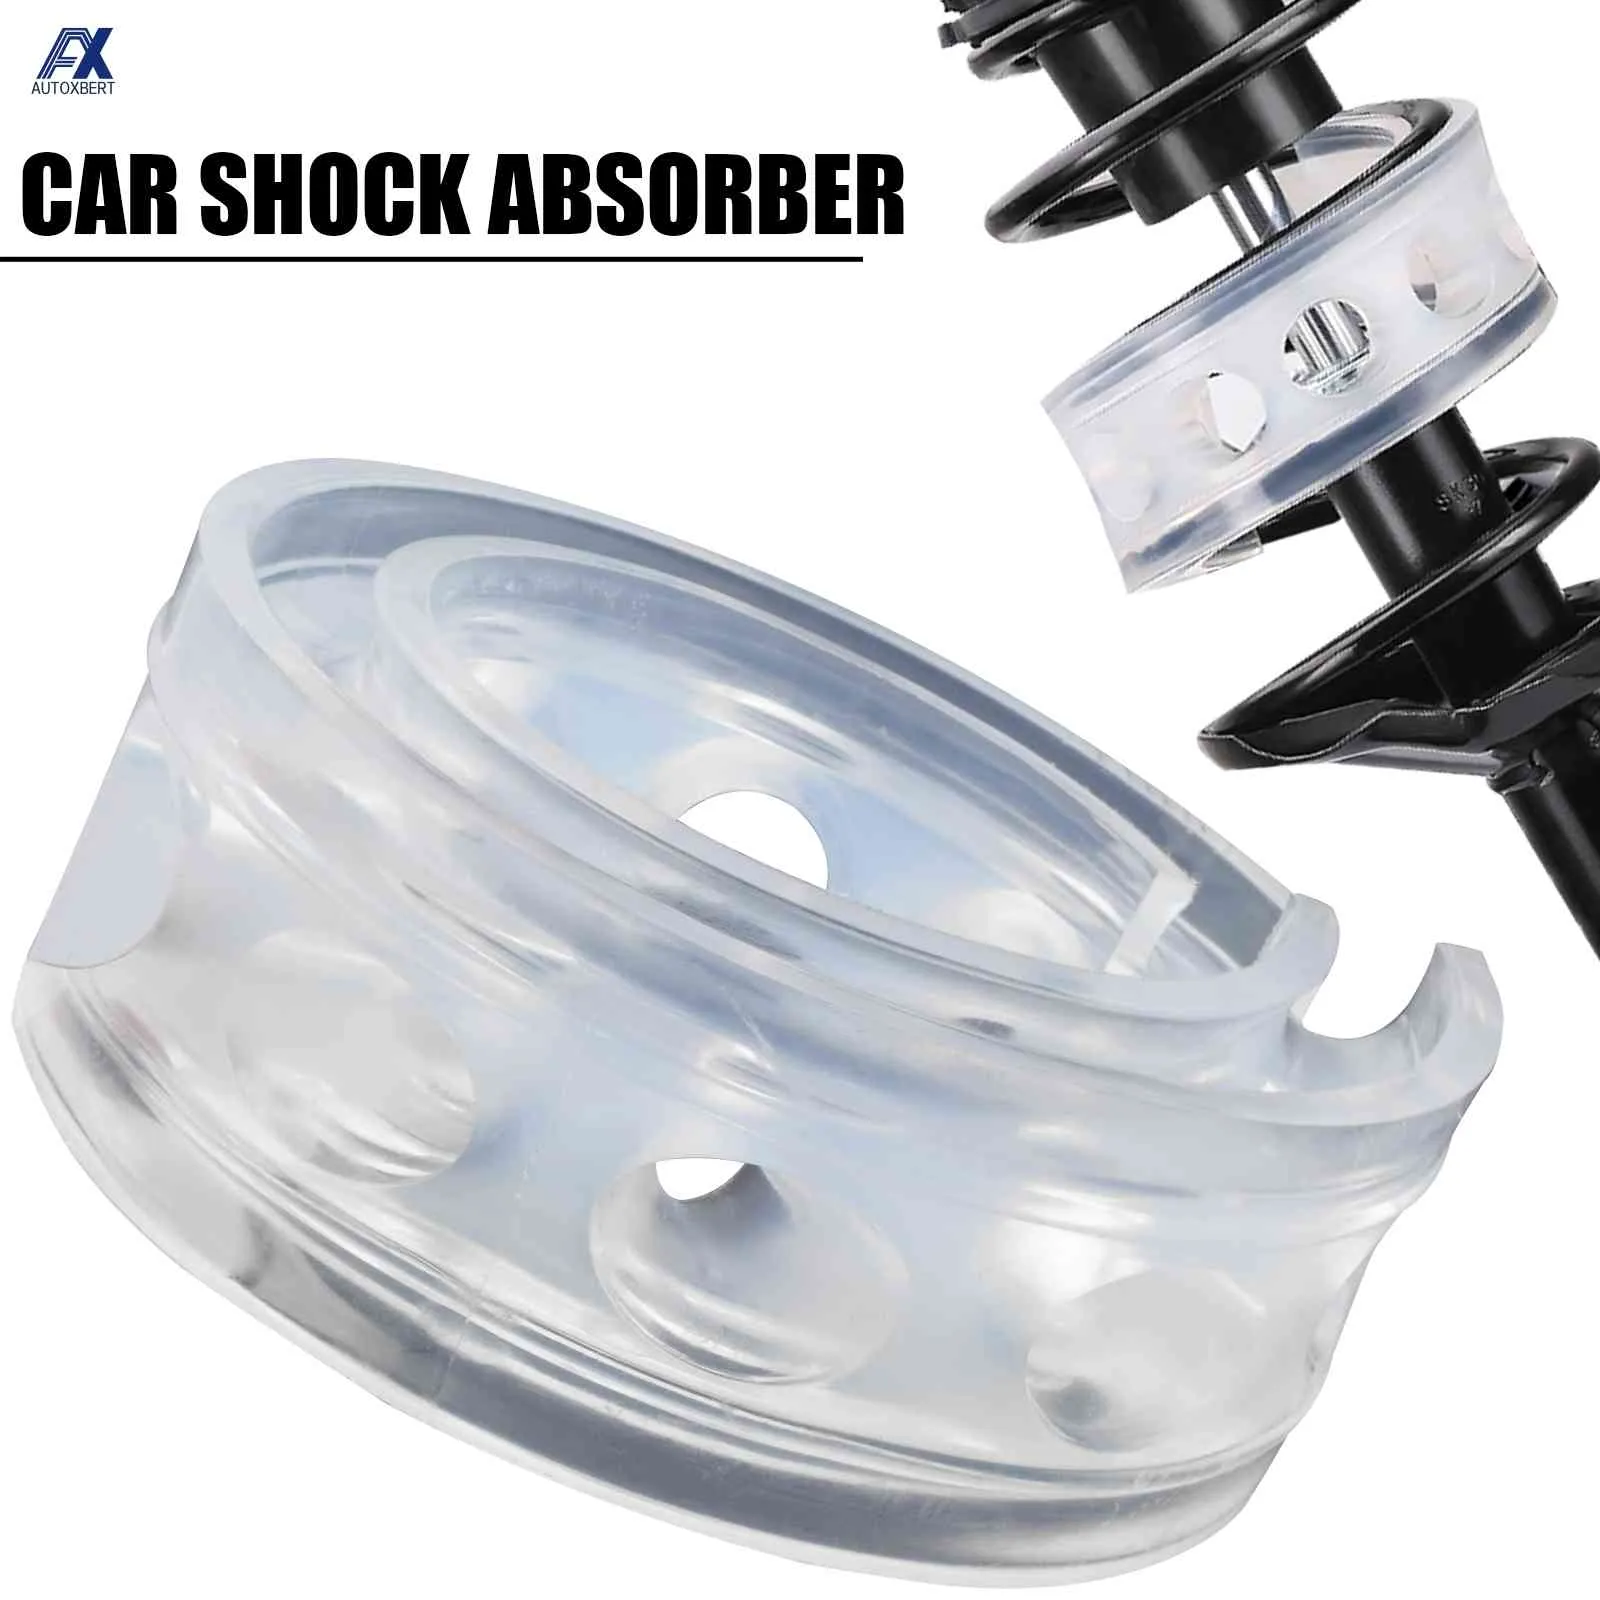 2Pc/4Pc Car Shock Absorber Auto Buffers Spring Bumper Suspension Universal For Duster Polo Lada Kalina Priora Focus